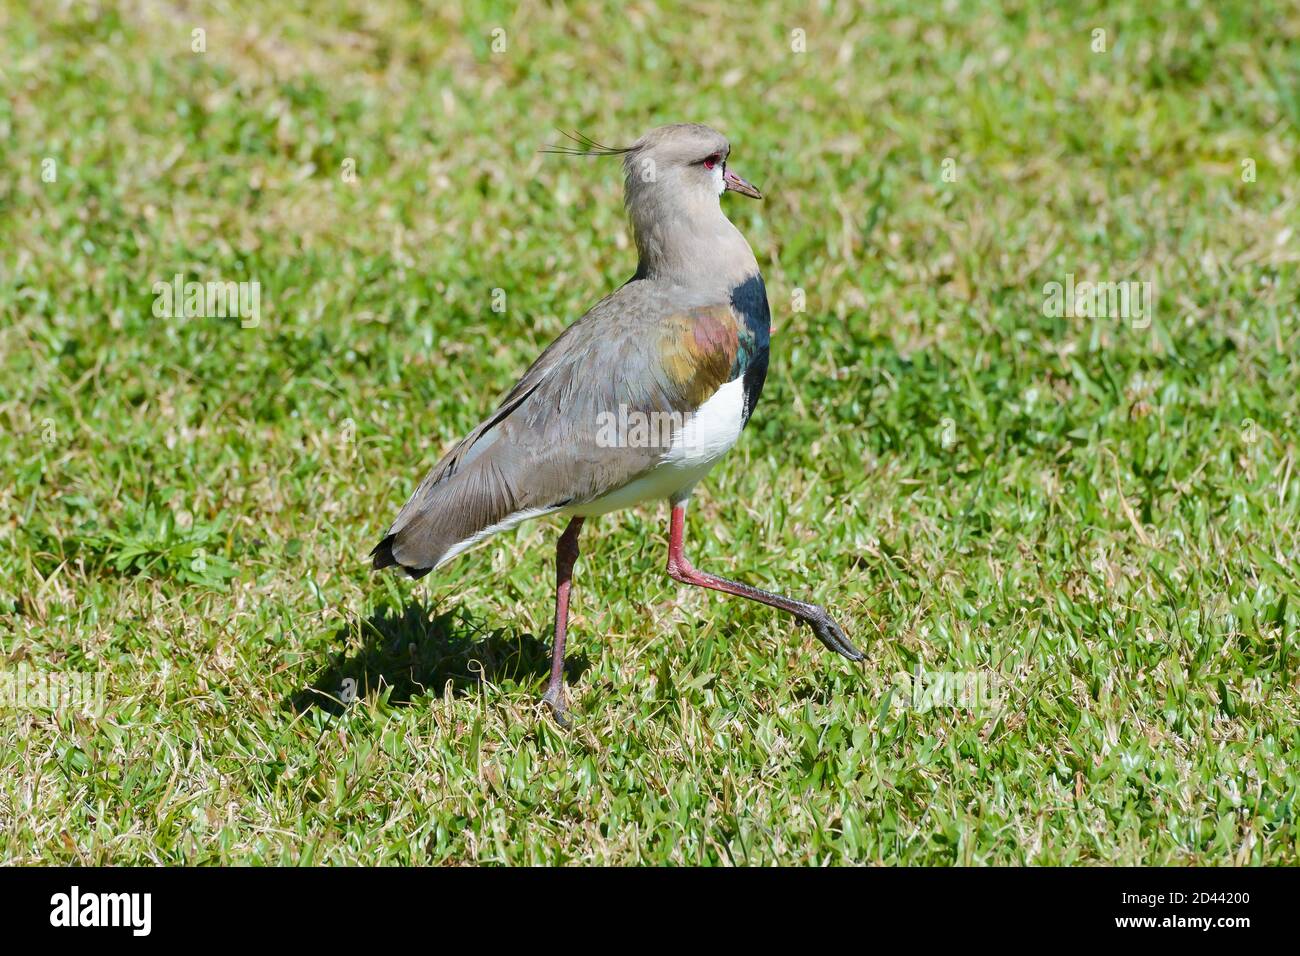 Southern lapwing wader (Vanellus chilensis), one of the symbols of the Brazilian state Rio Grande do Sul and national bird of Uruguay. Stock Photo